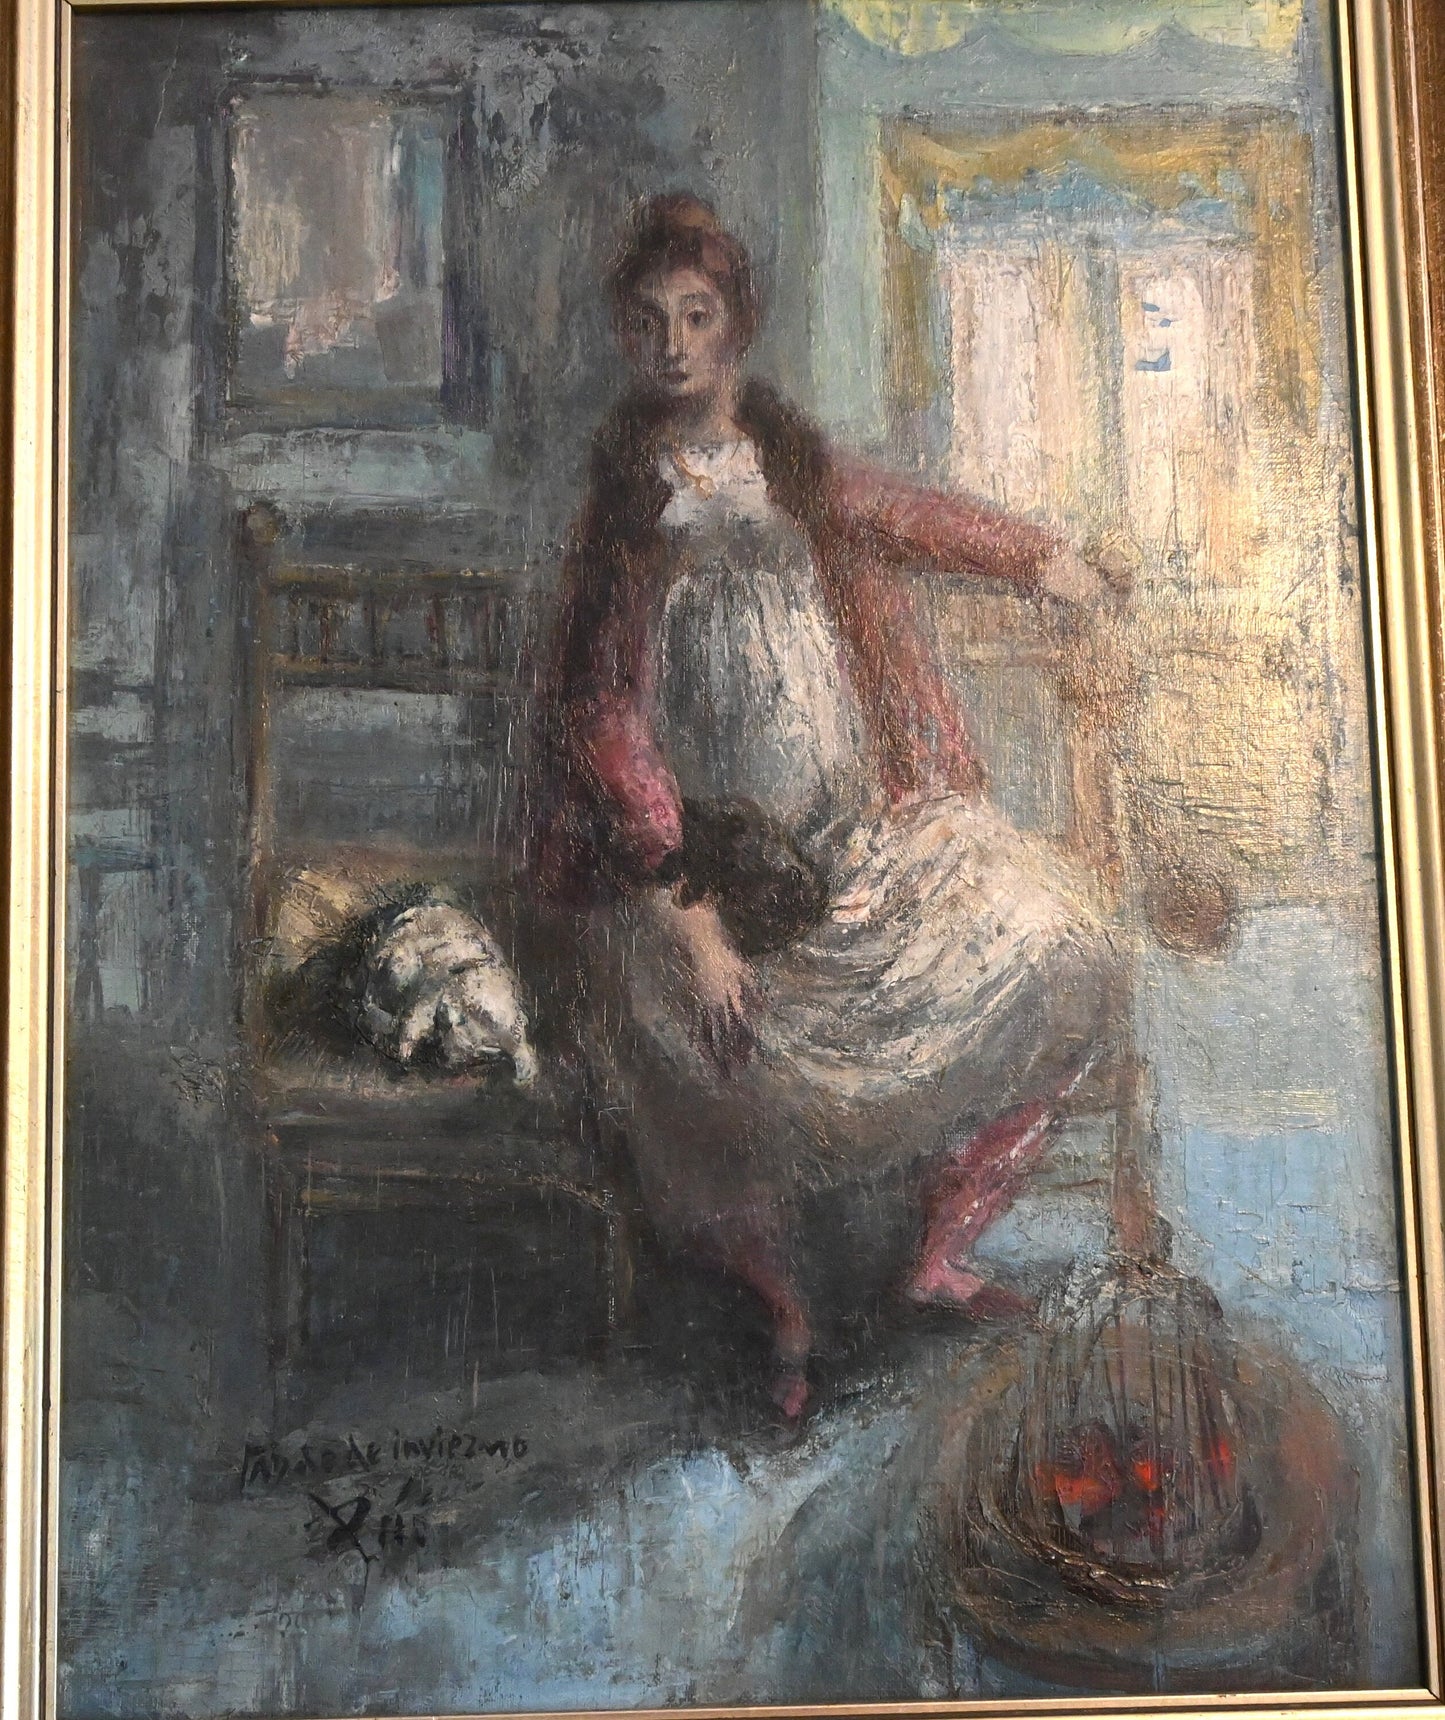 Pico Mitjans Jose (Spain, 1904-1991) Original Oil - 25.5"H x 20.5"W- Well listed Painter-Stunning! high auction & galley price Impressionist